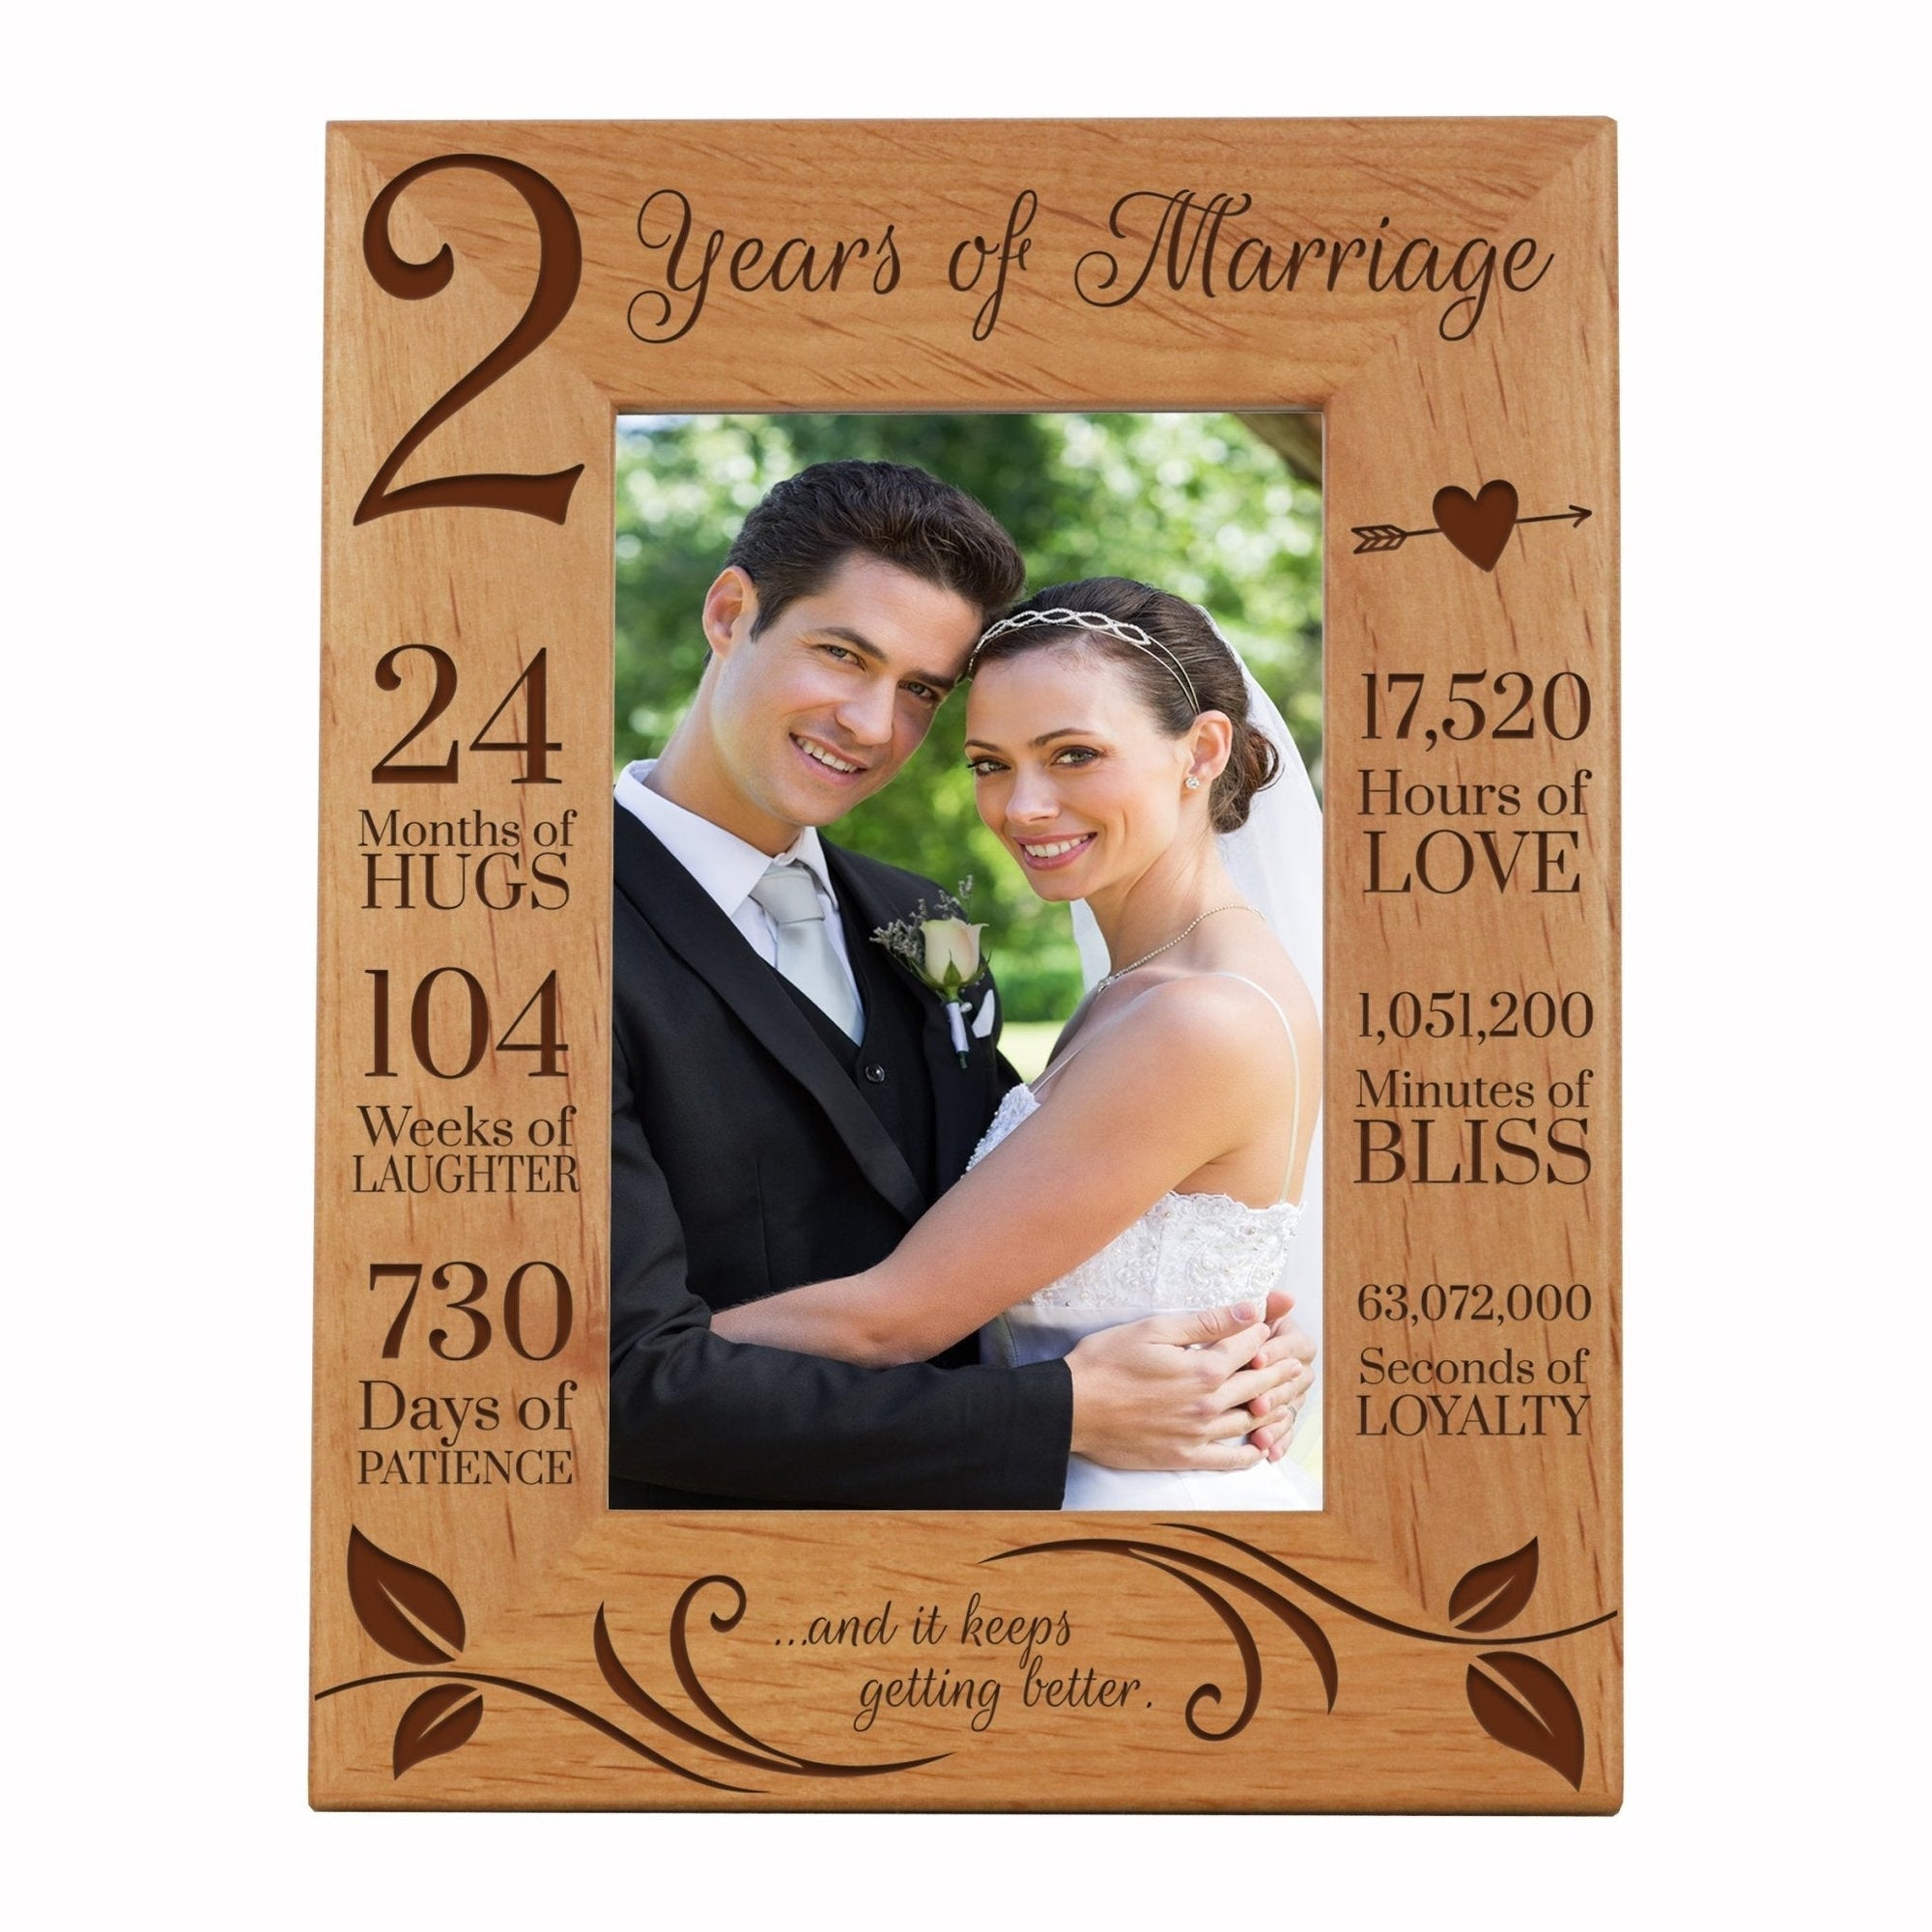 Engraved 2nd Wedding Anniversary Photo Frame Wall Decor Gift for Couples - Keeps Getting Better - LifeSong Milestones